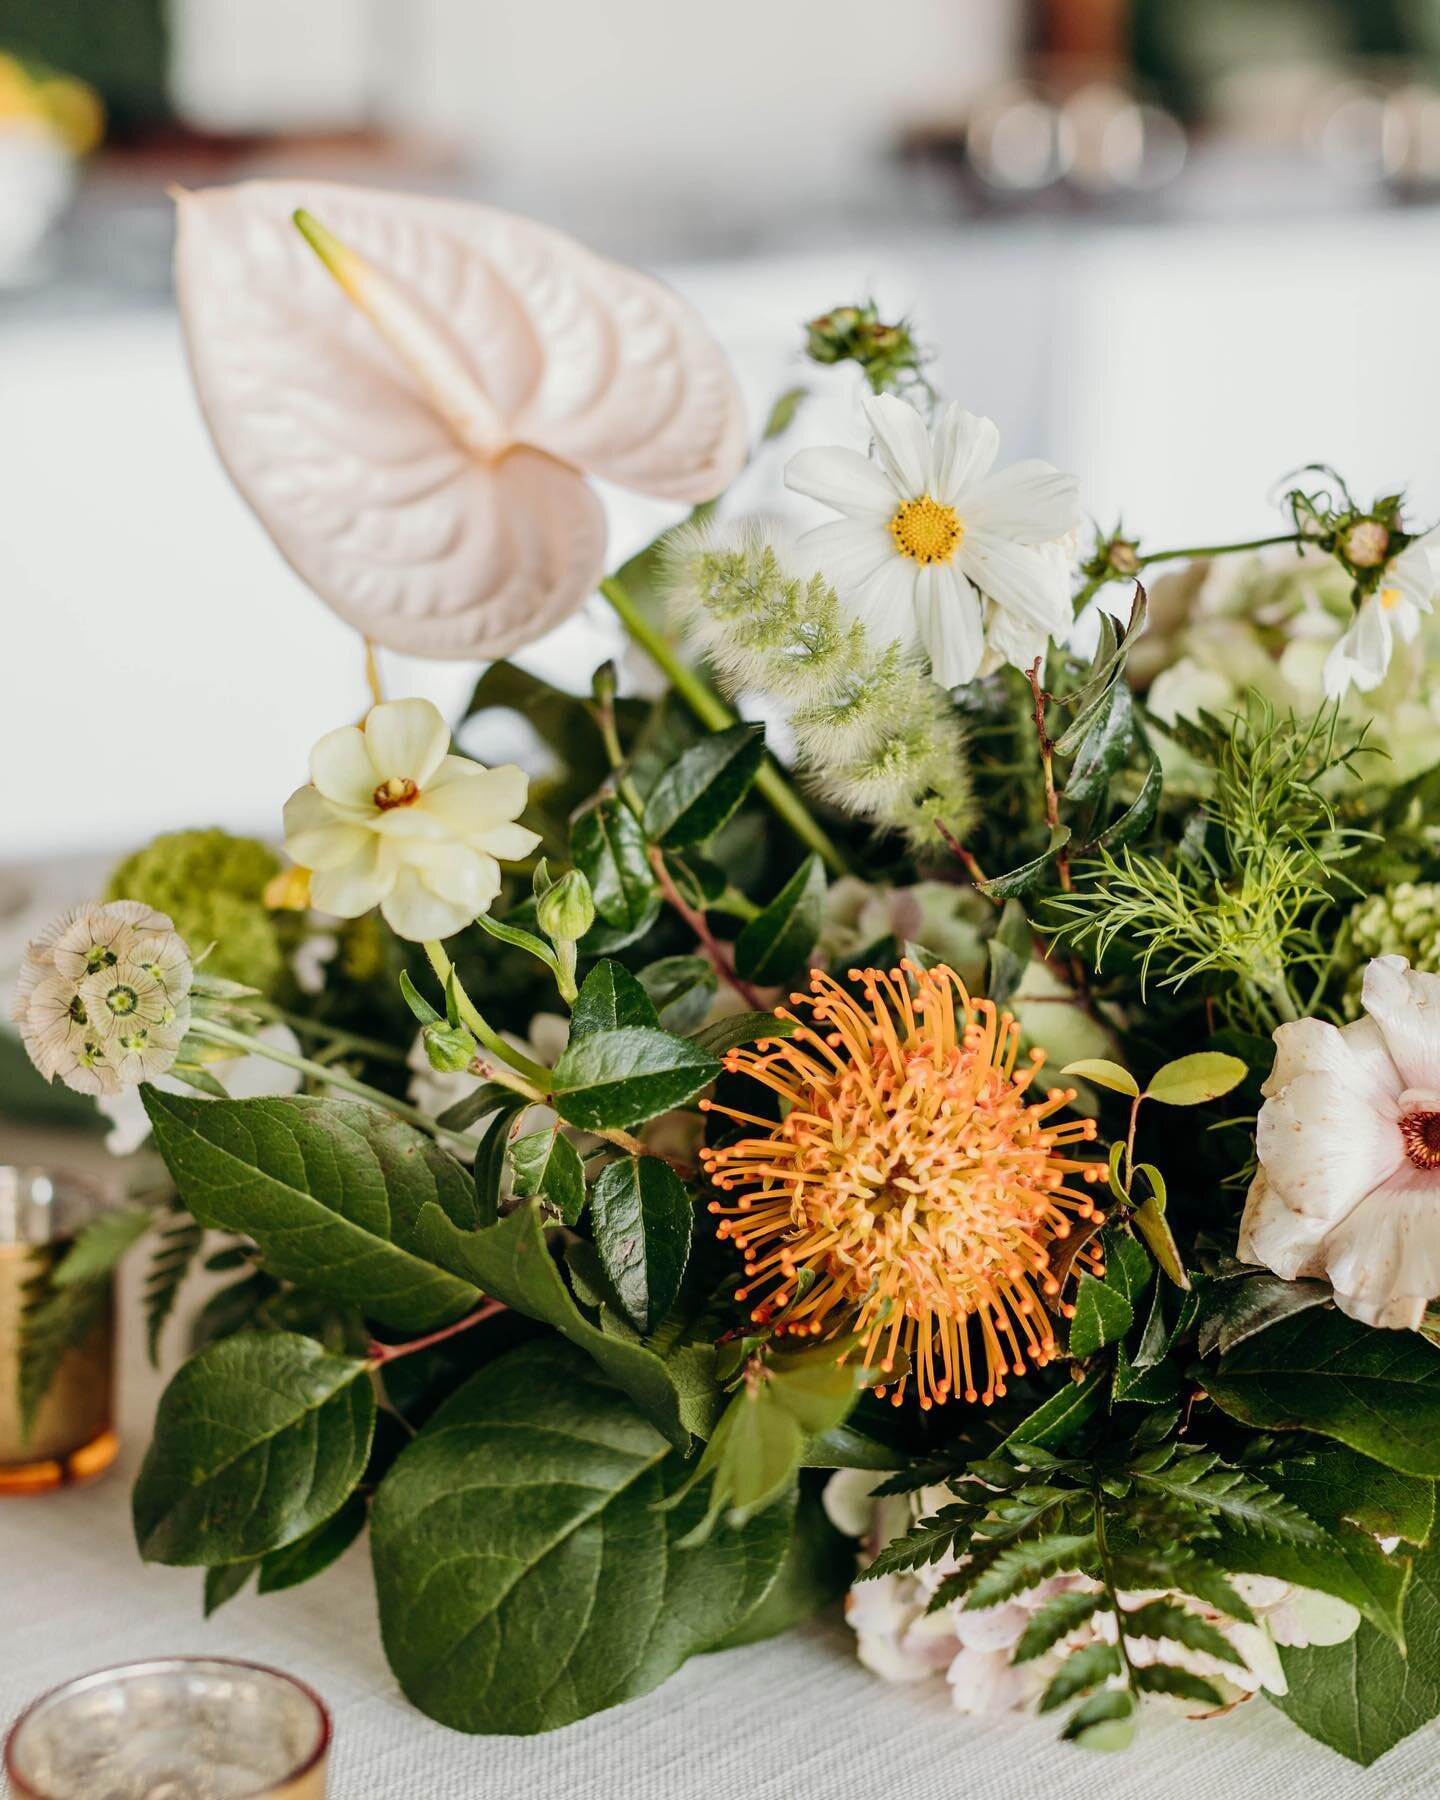 Let&rsquo;s talk about f l o r a l s  for your big day. Important. They&rsquo;re in every photo, they help dress the room or the venue, and they help give you something for your hands to do. And when you have the @belovedeventsco on your vendor team,